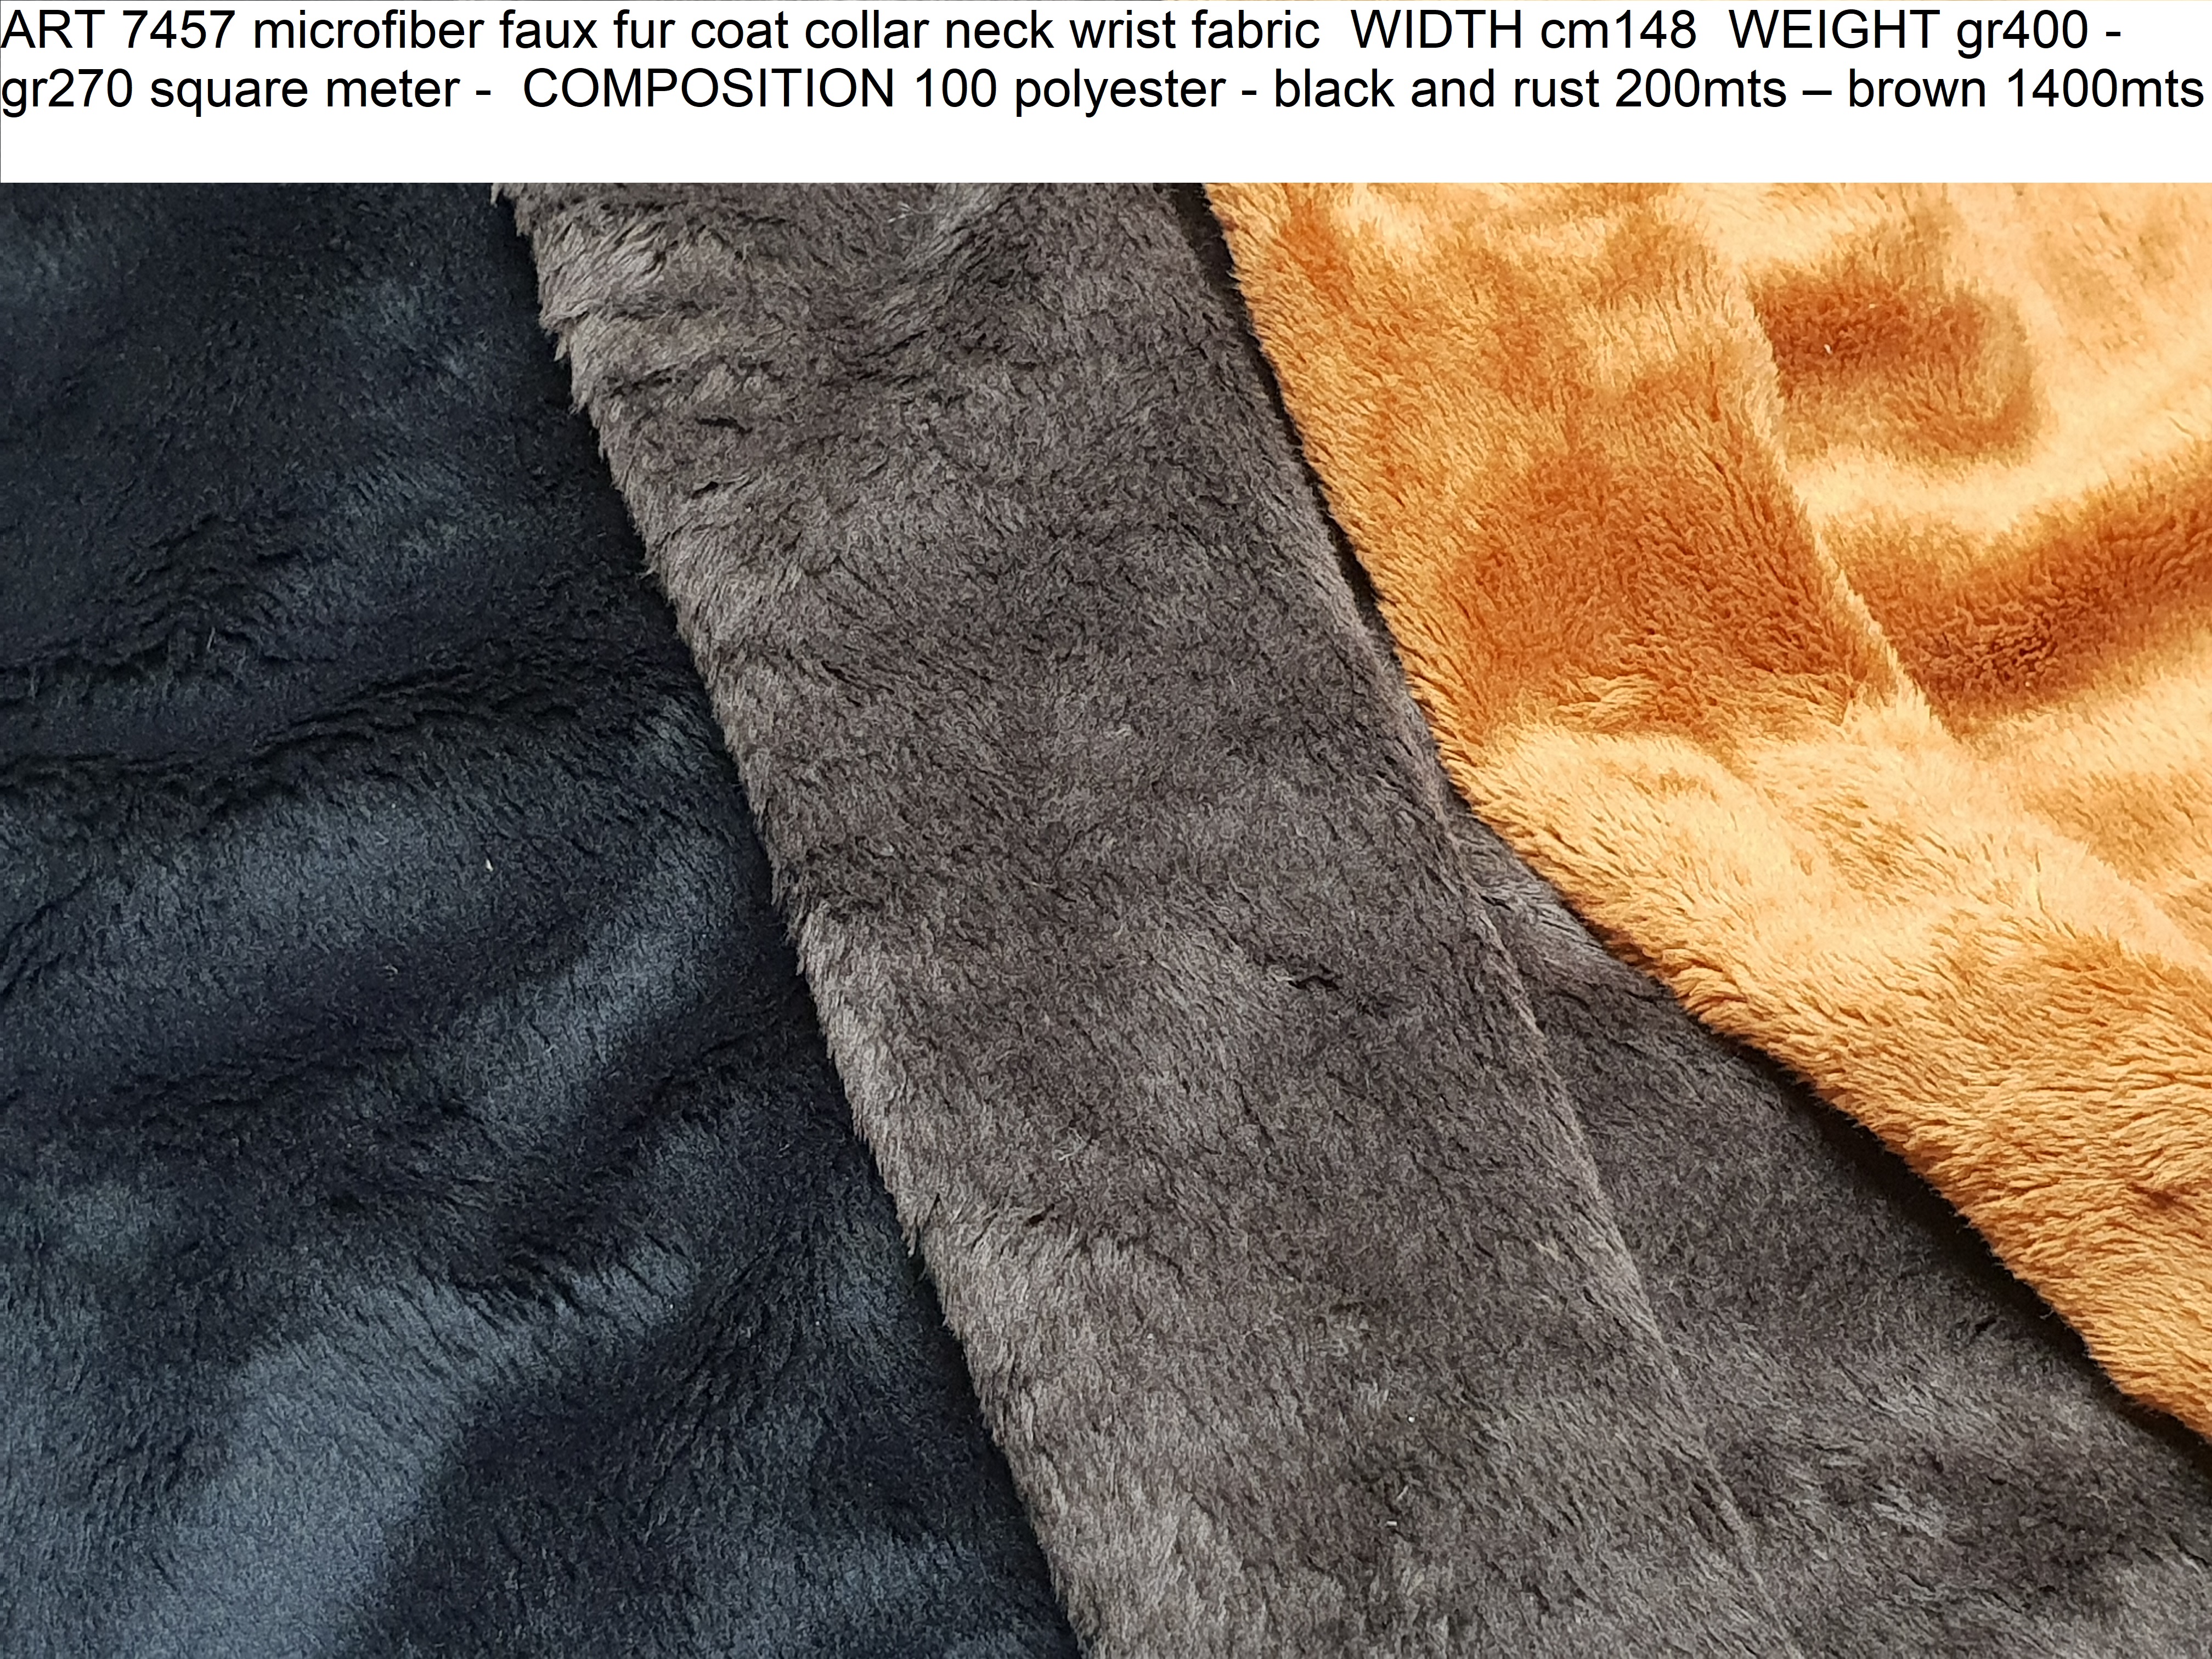 ART 7457 microfiber faux fur coat collar neck wrist fabric WIDTH cm148 WEIGHT gr400 - gr270 square meter - COMPOSITION 100 polyester - black and rust 200mts – brown 1400mts